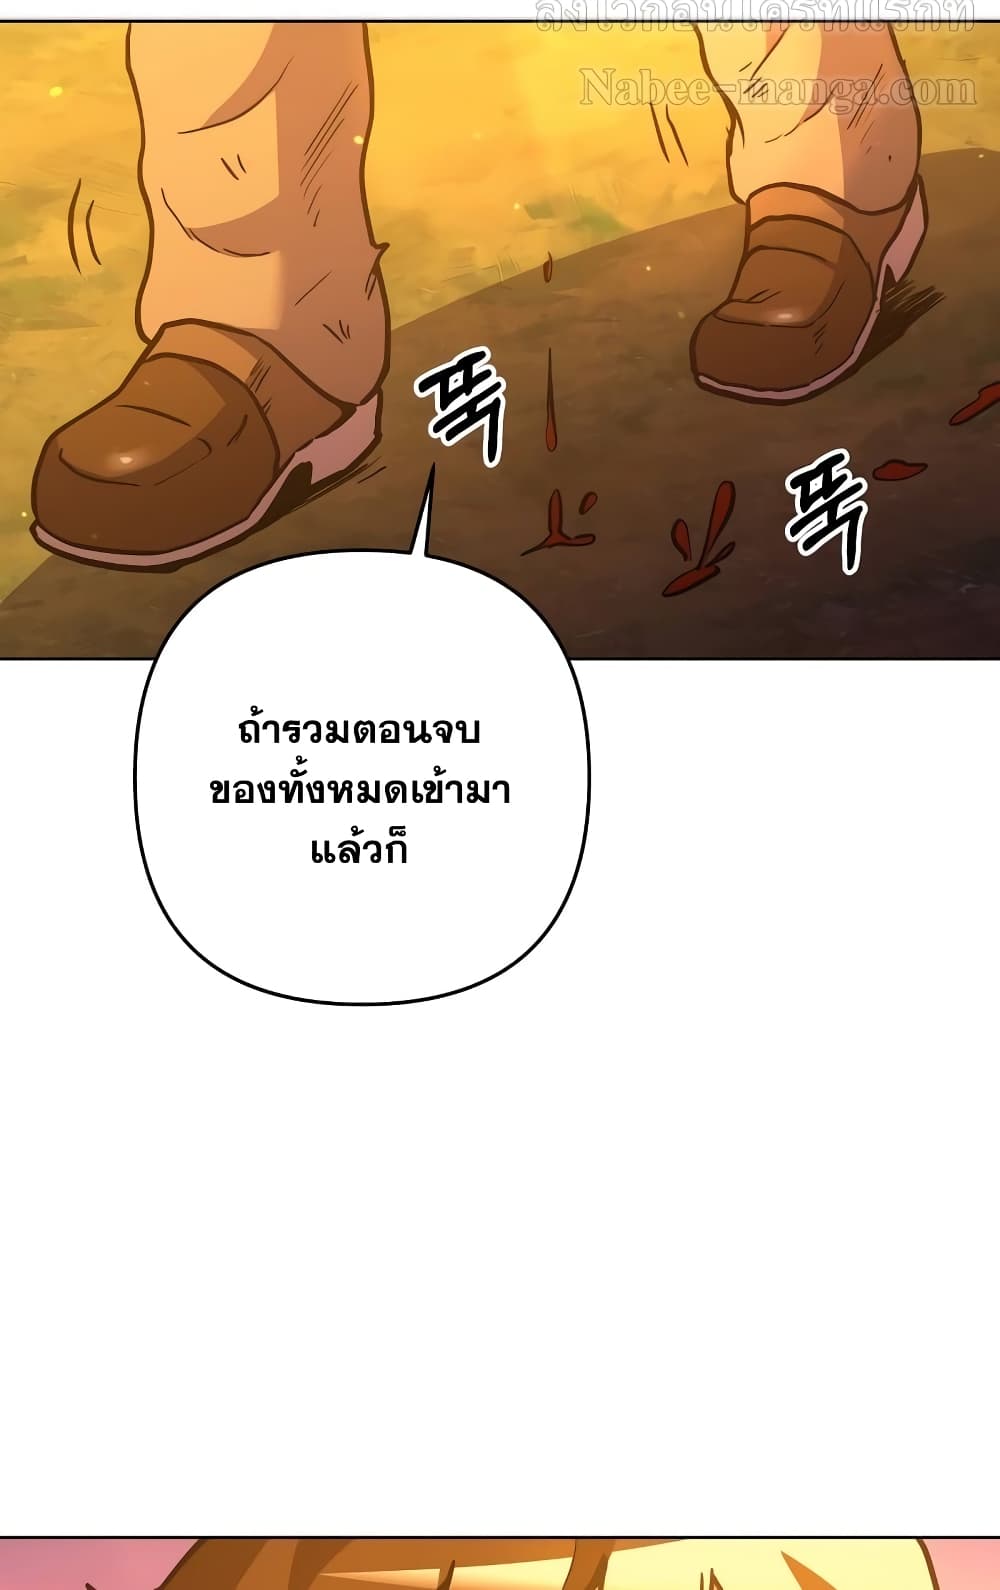 Surviving in an Action Manhwa 6 094